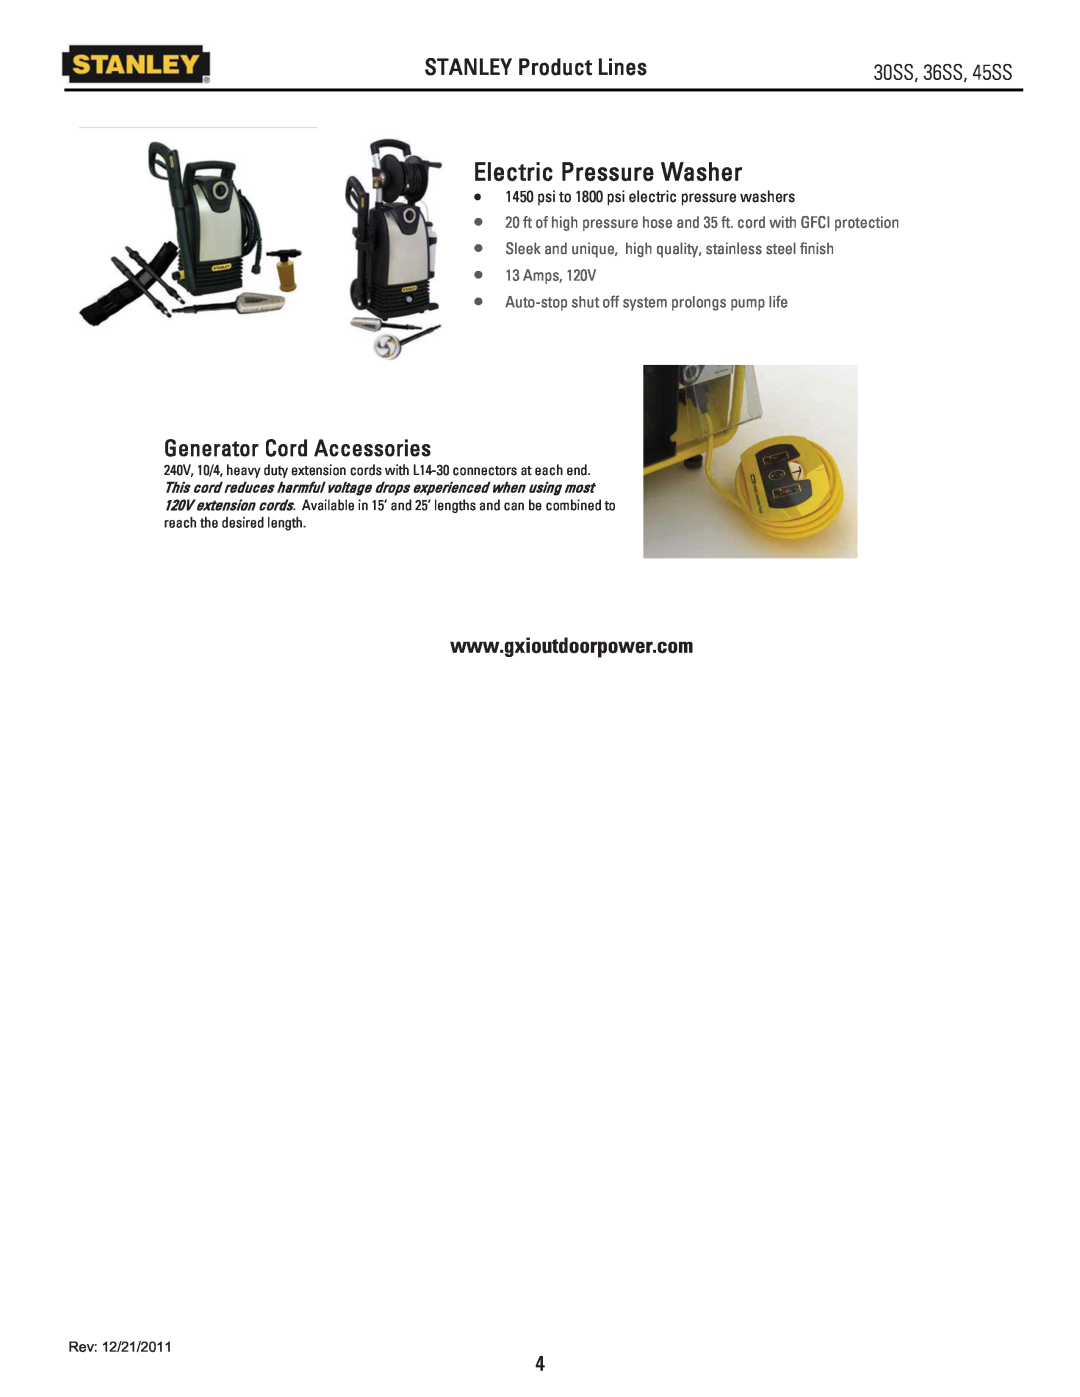 Stanley Black & Decker 30SS, 36SS, 45SS owner manual STANLEY Product Lines, Generator Cord Accessories 